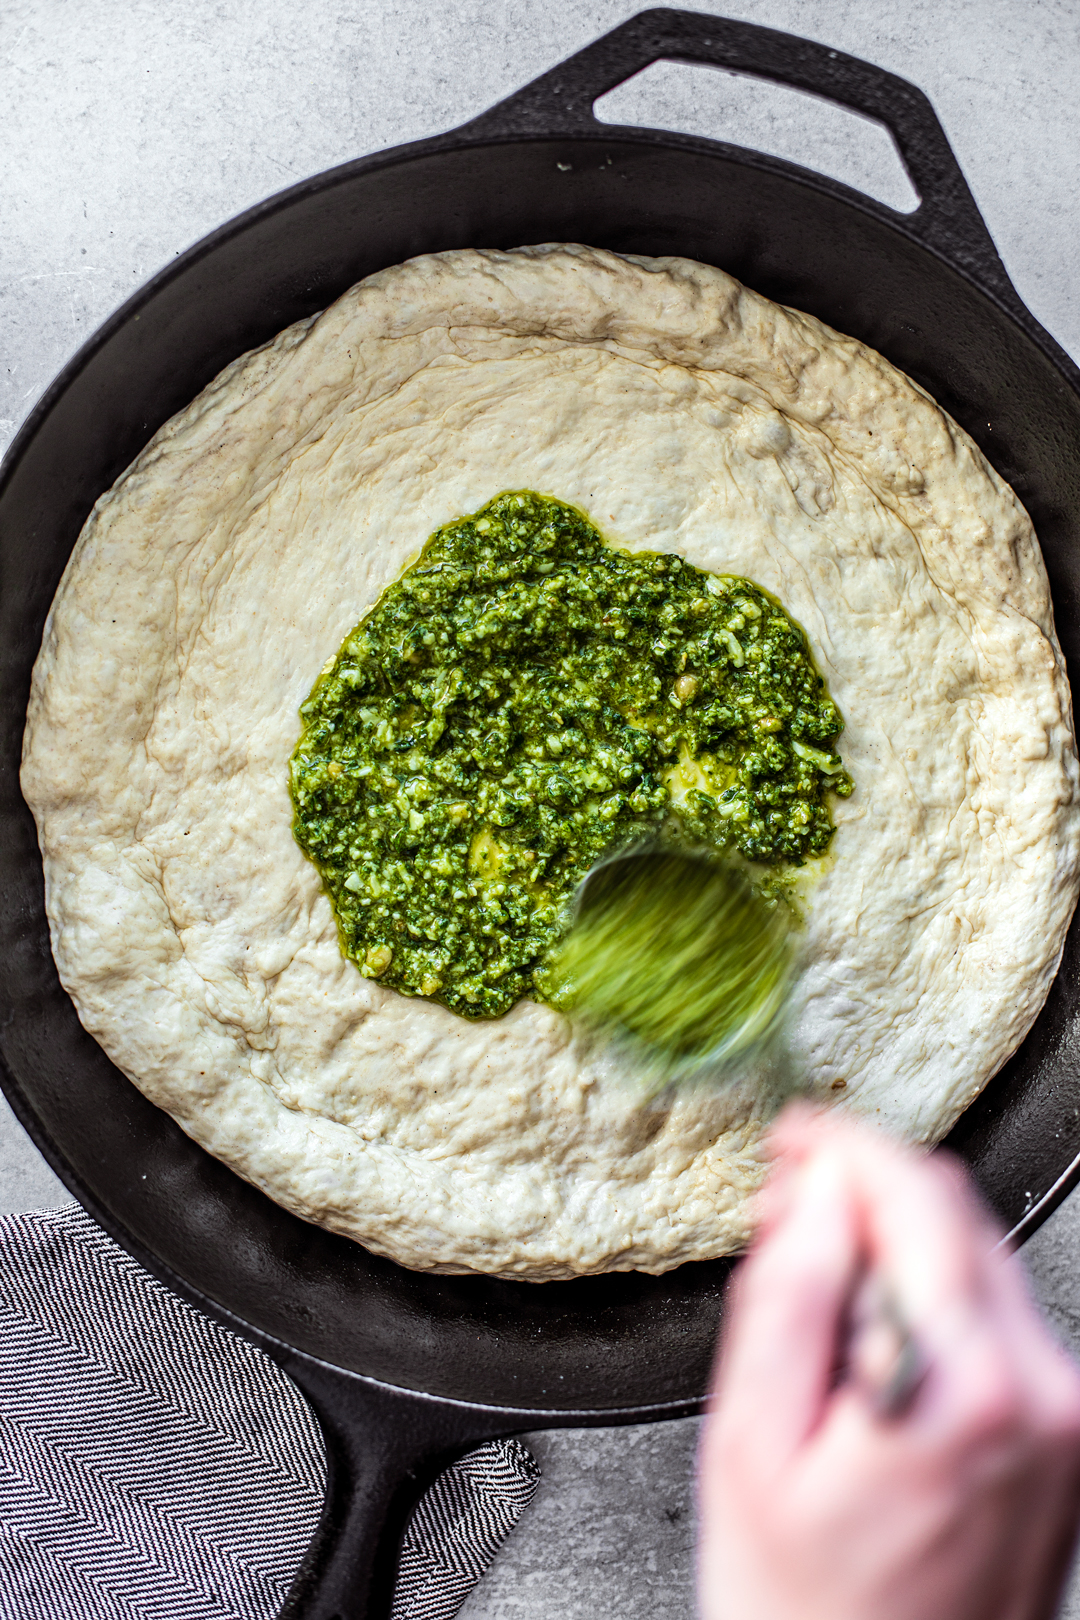 Pizza dough formed in skillet being topped with fresh pesto.